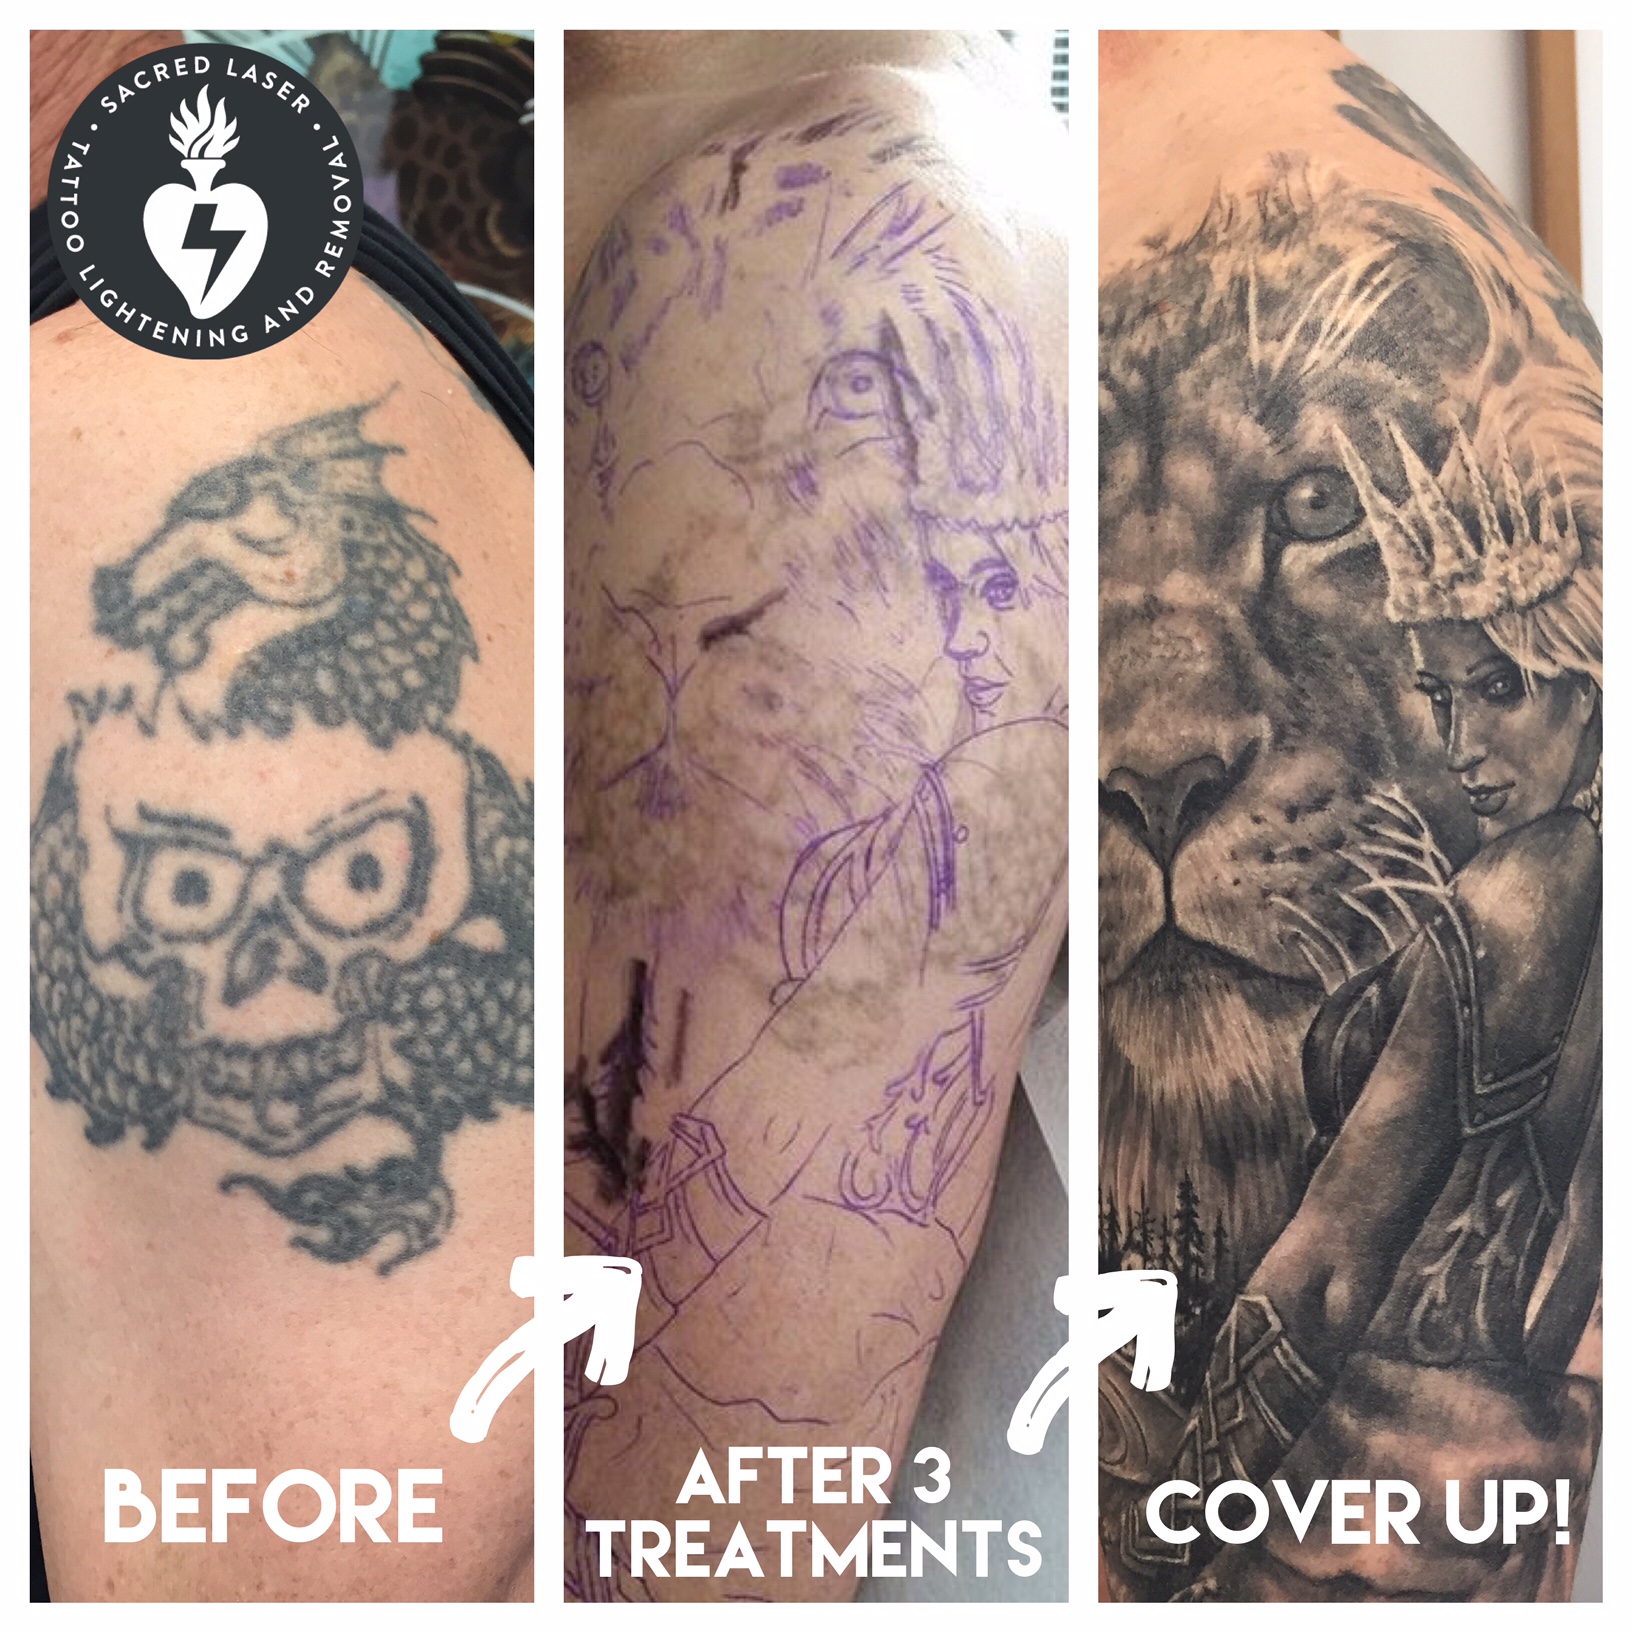 Laser tattoo removal before and after - Redeem Hull